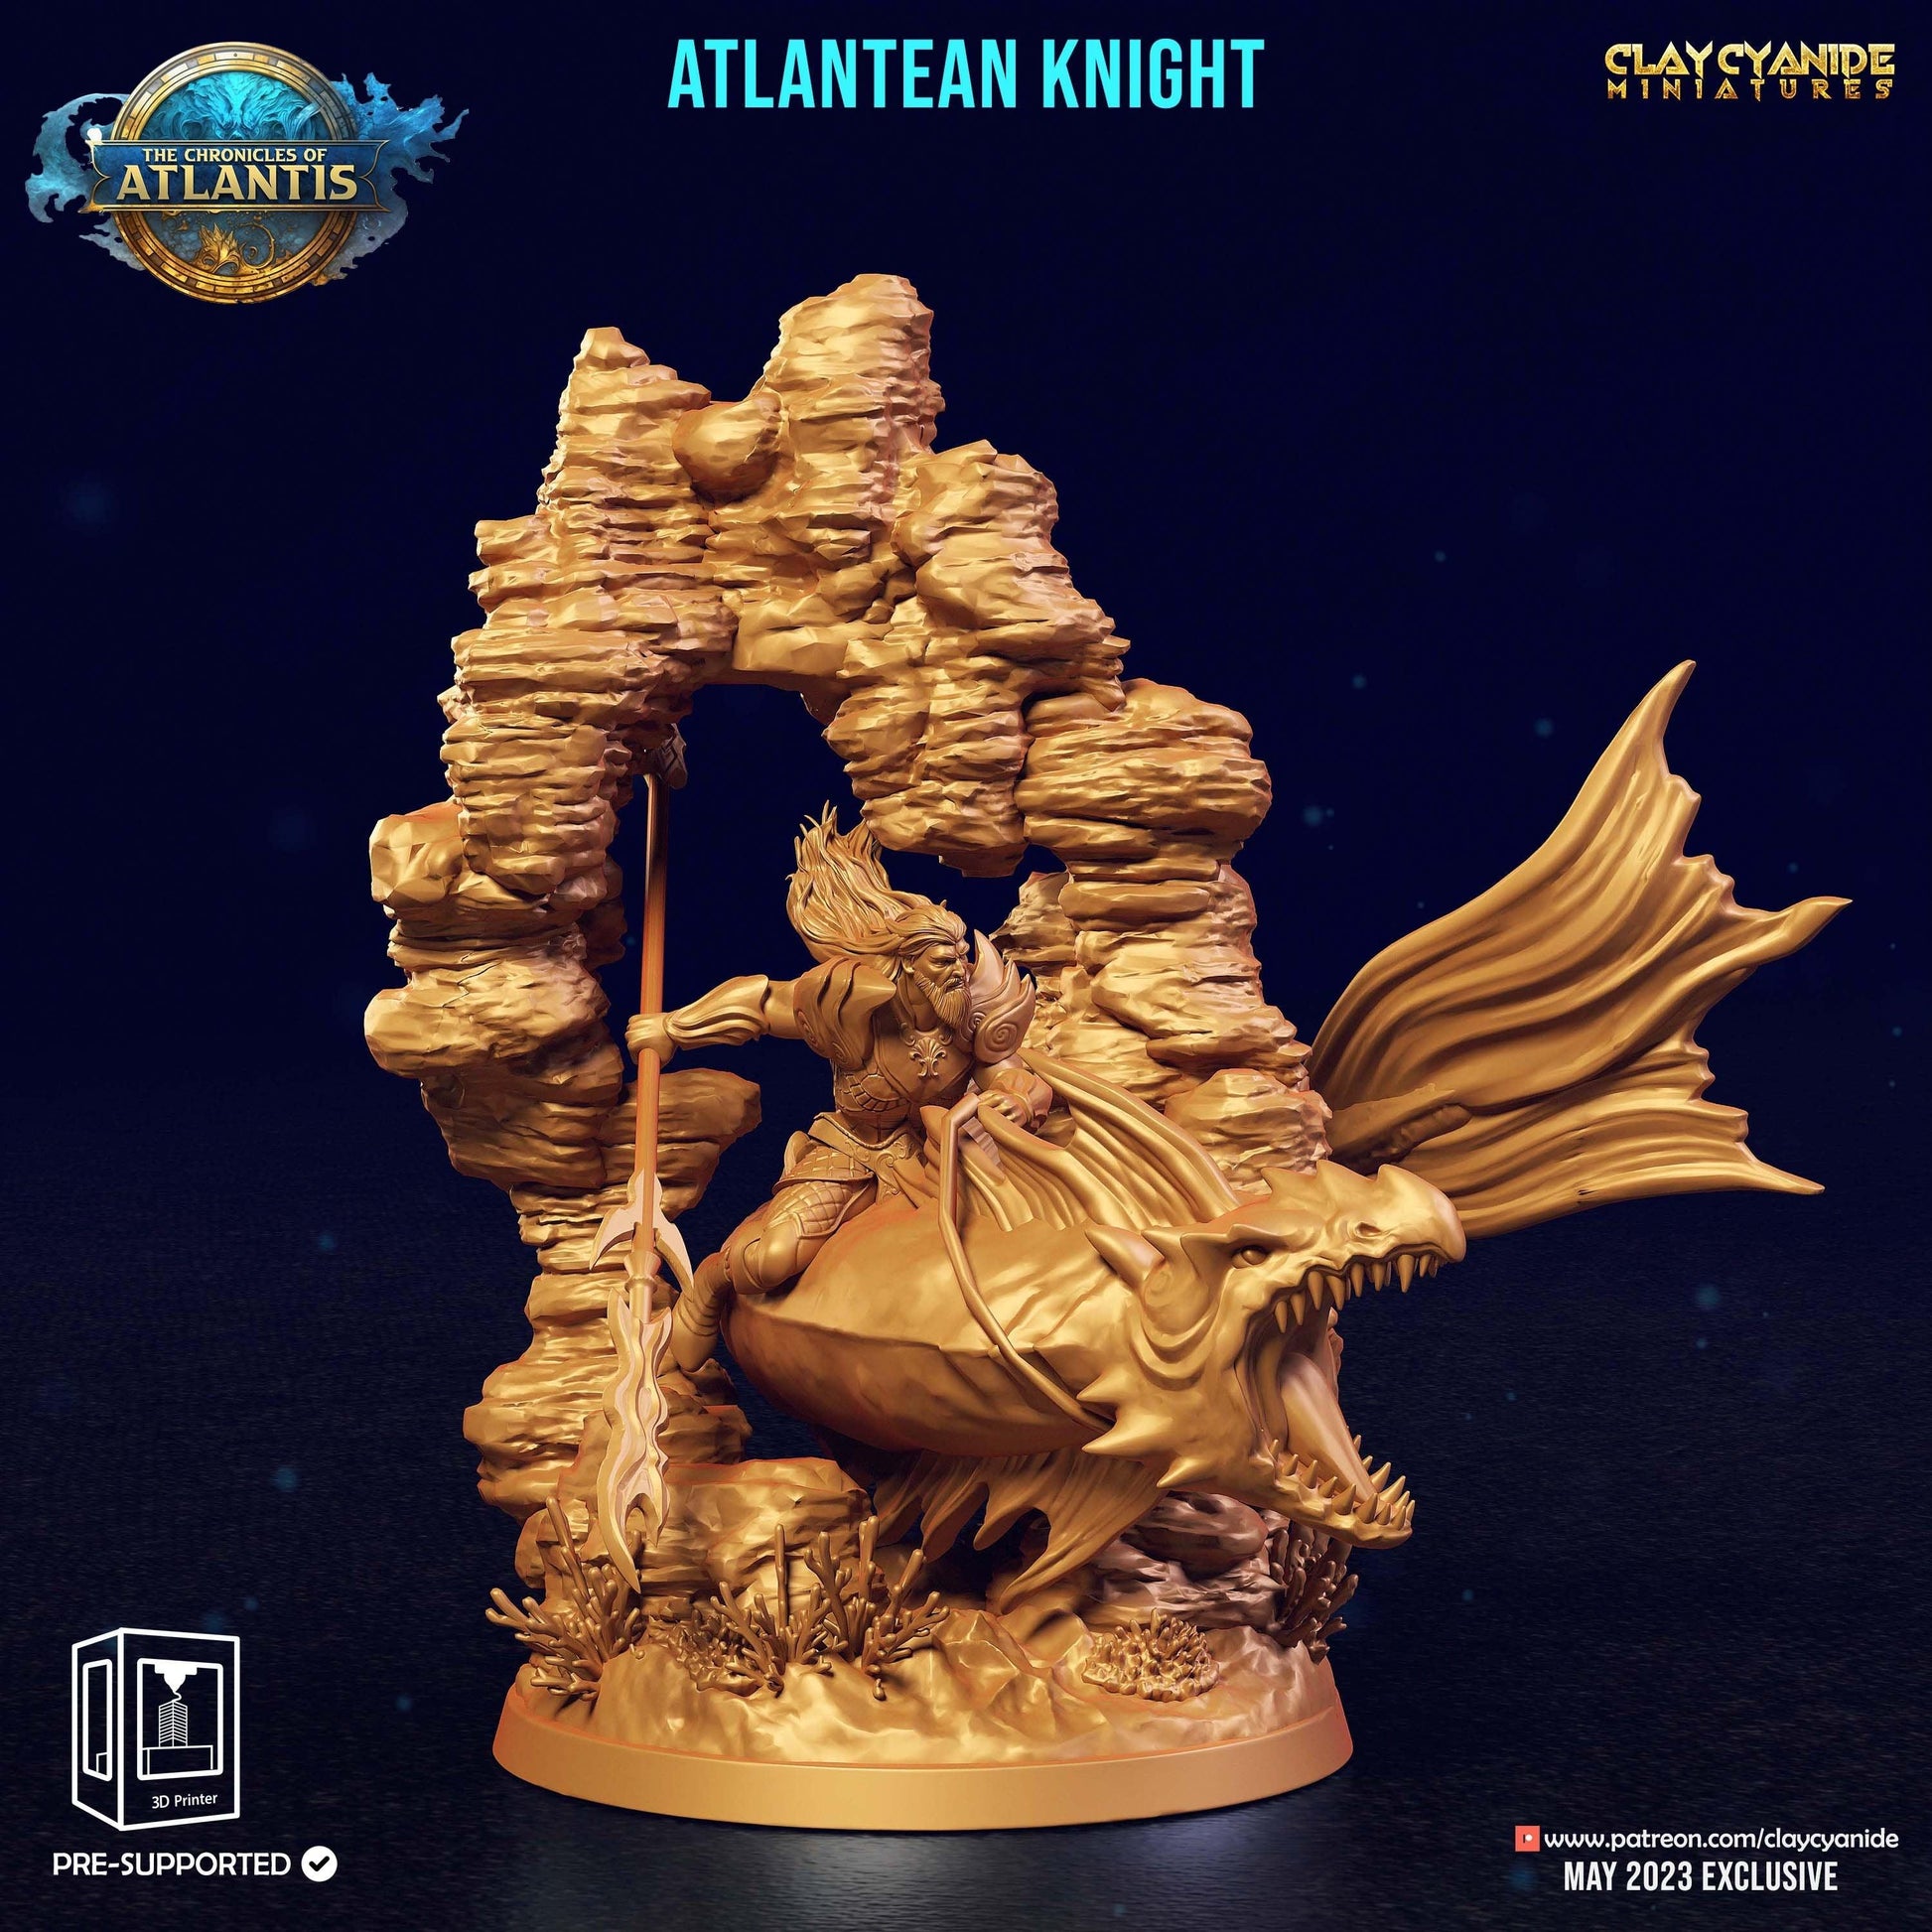 DnD Atlantean Knight Miniature | Clay Cyanide | Chronicles of Atlantis | DnD Miniature Dungeons and Dragons DnD 5e Underwater Knight - Plague Miniatures shop for DnD Miniatures